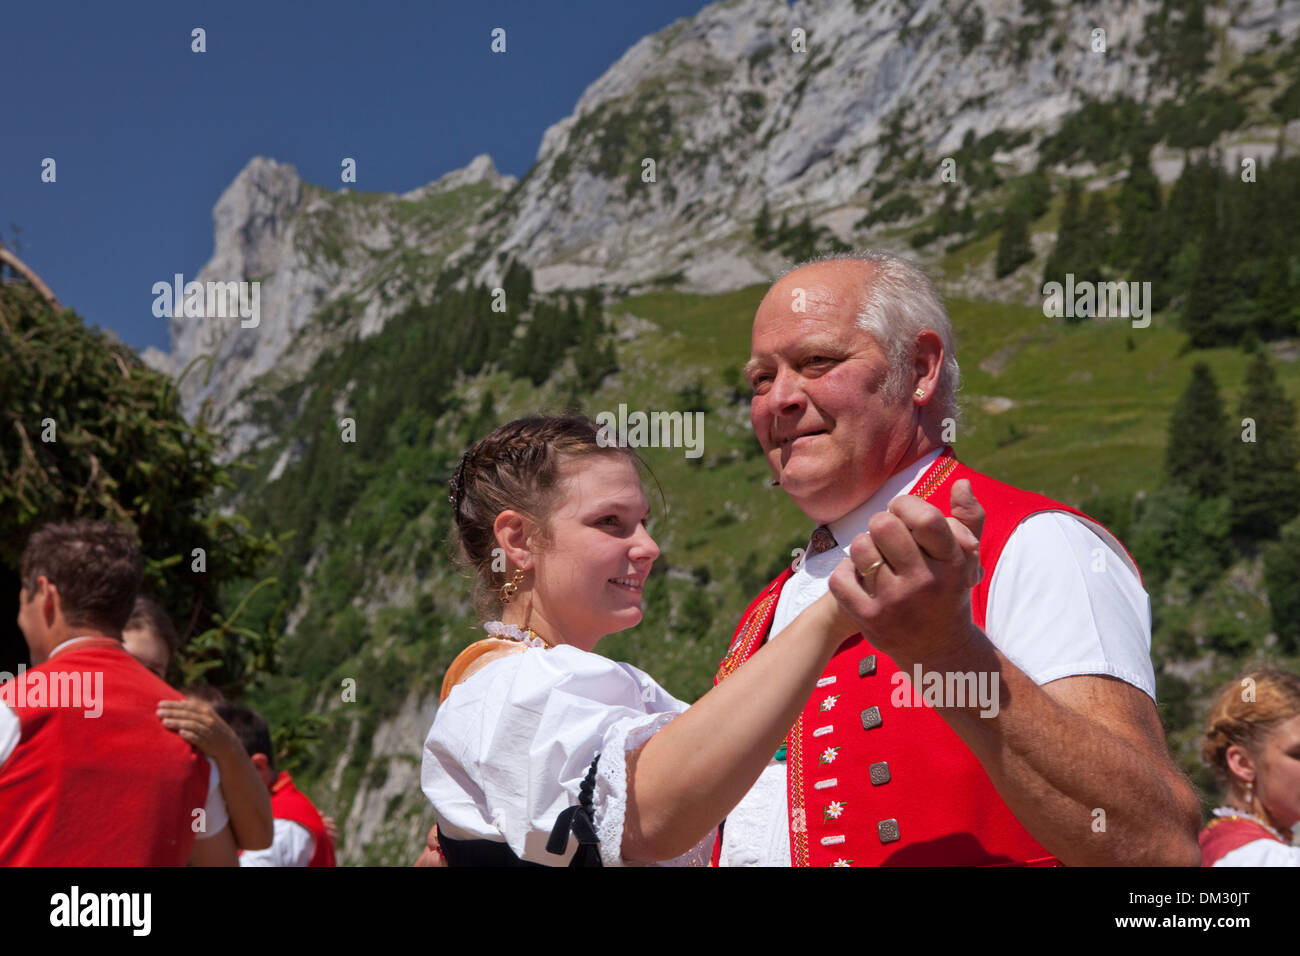 Schweiz Europa Alp Partei Bollenwees Tradition Alpen Berg Berge Berg See See Tradition Folklore national Stockfoto